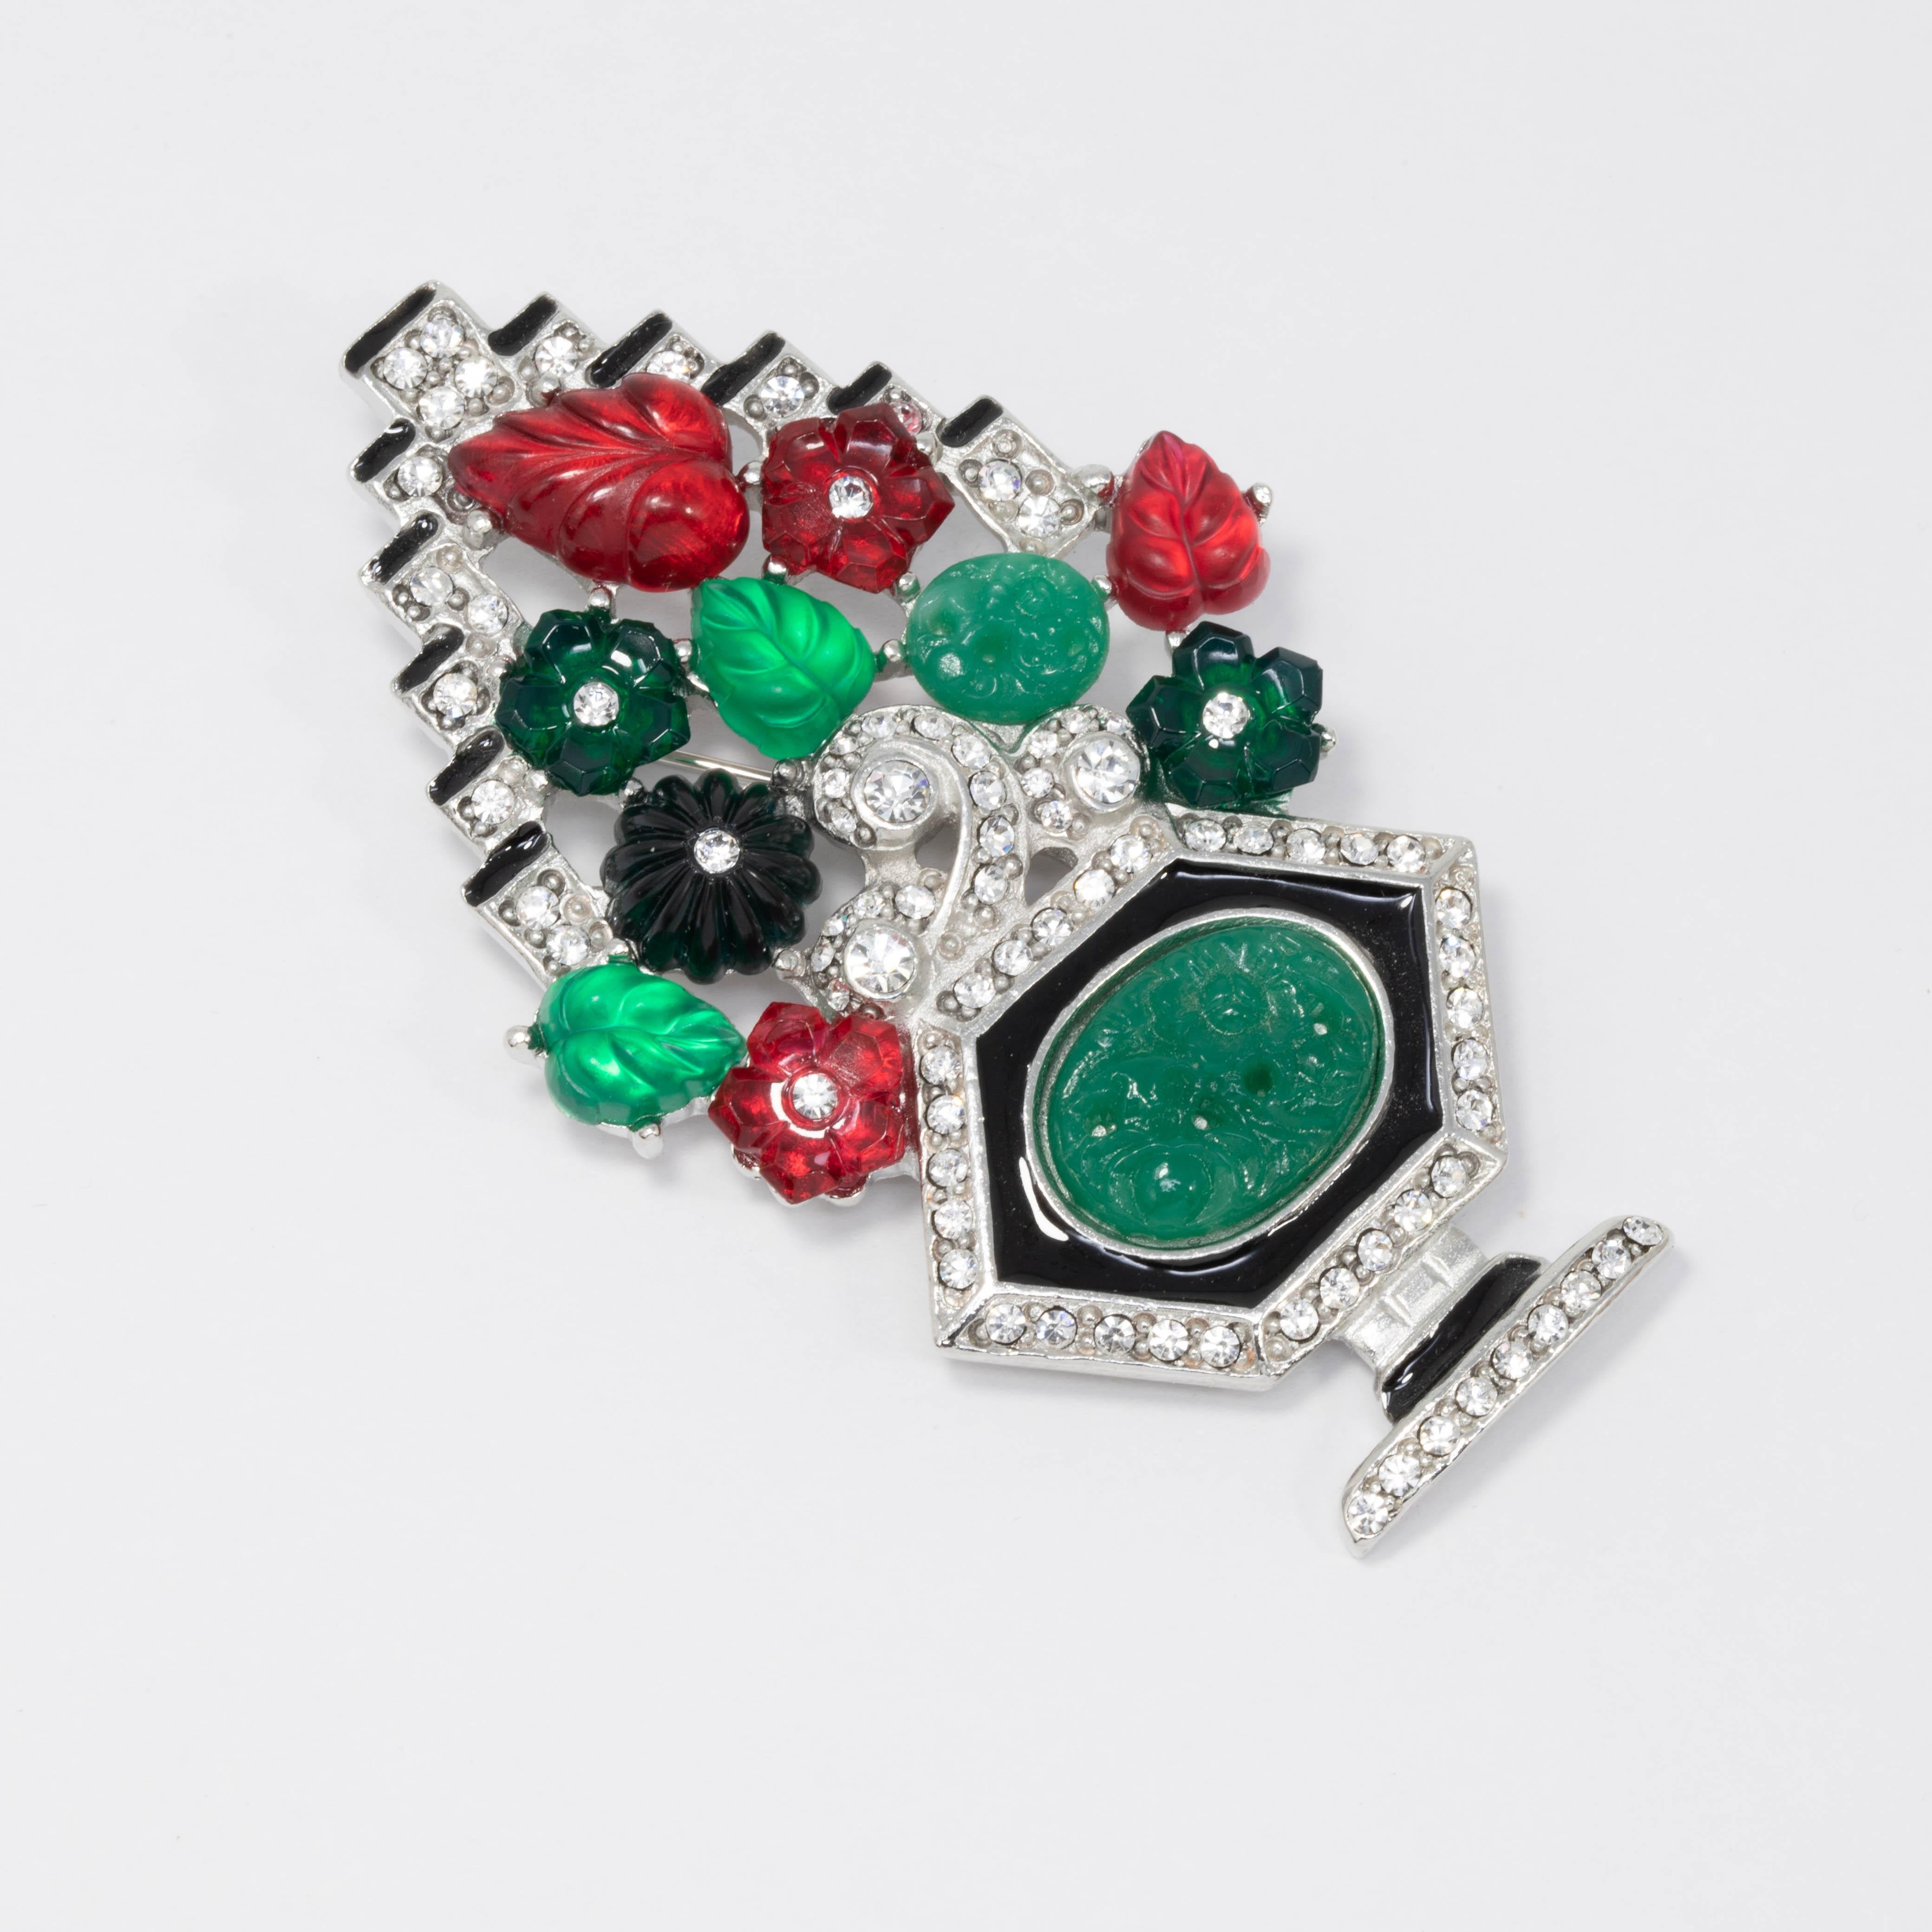 Colorful tutti-frutti style art deco brooch by Kenneth Lane. Features bright green and red flower and leaf motifs accented with clear crystals and black enamel. Rhodium-plated metal setting.

Pair with the Kenneth Jay Lane Tutti Frutti art deco